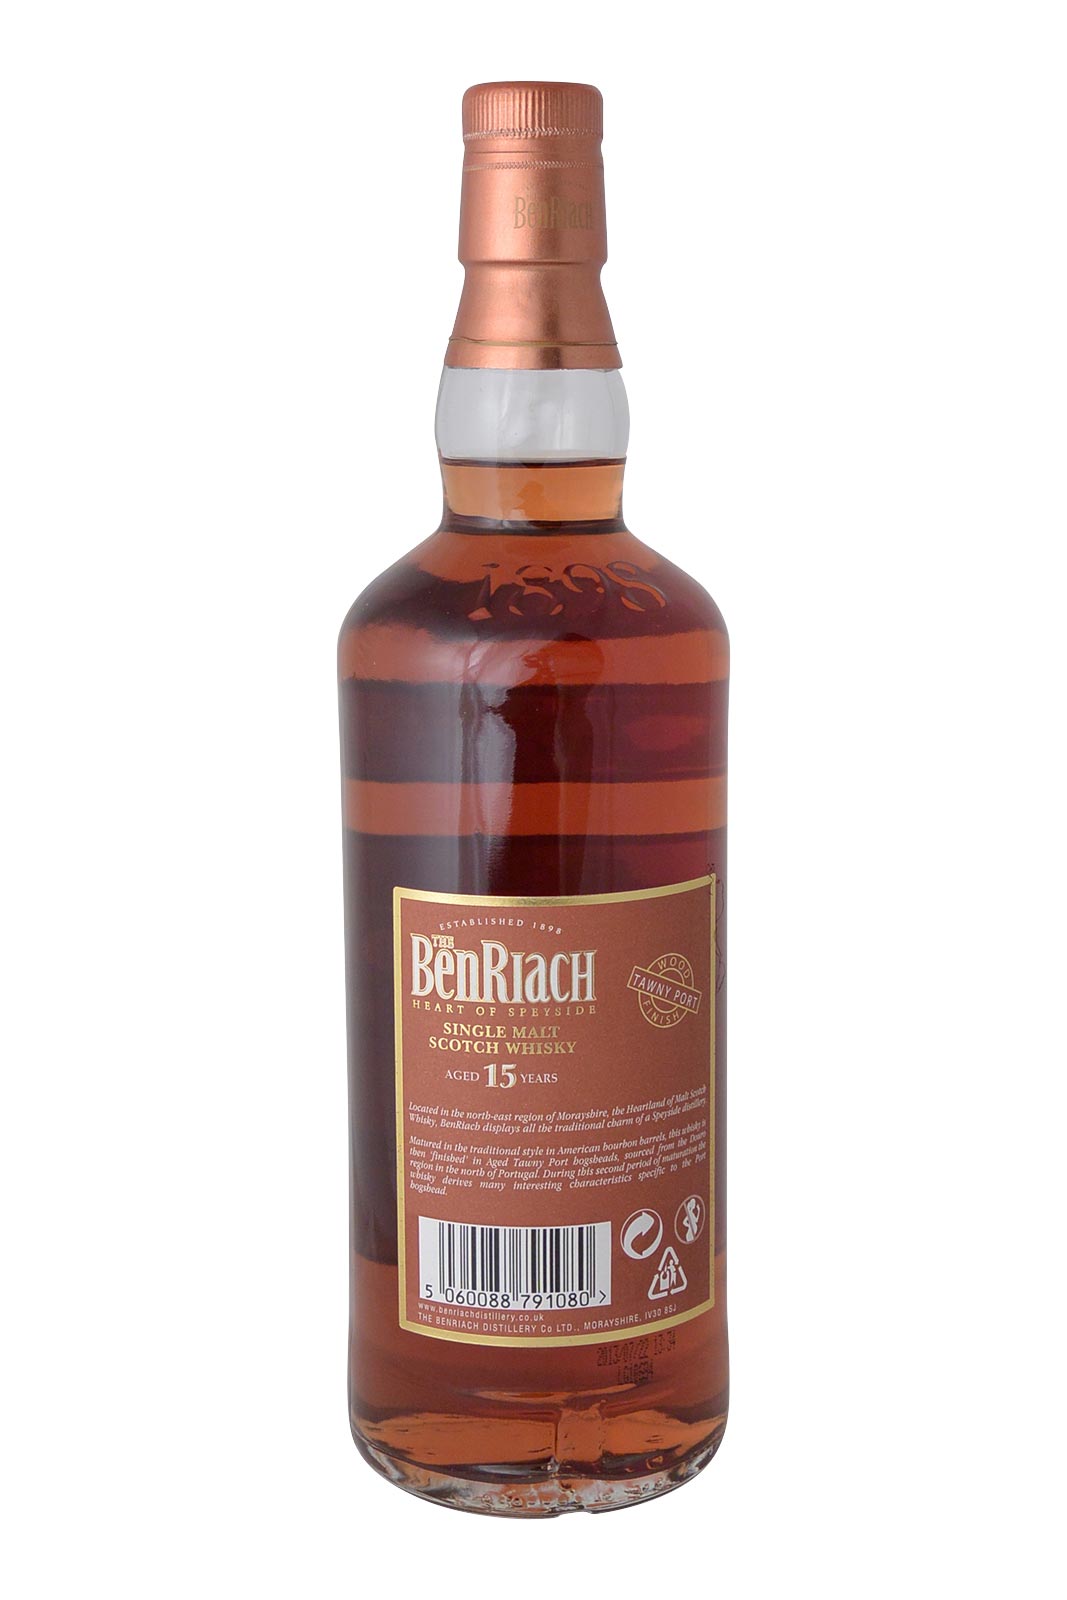 Benriach Tawny Port 15 Year Old